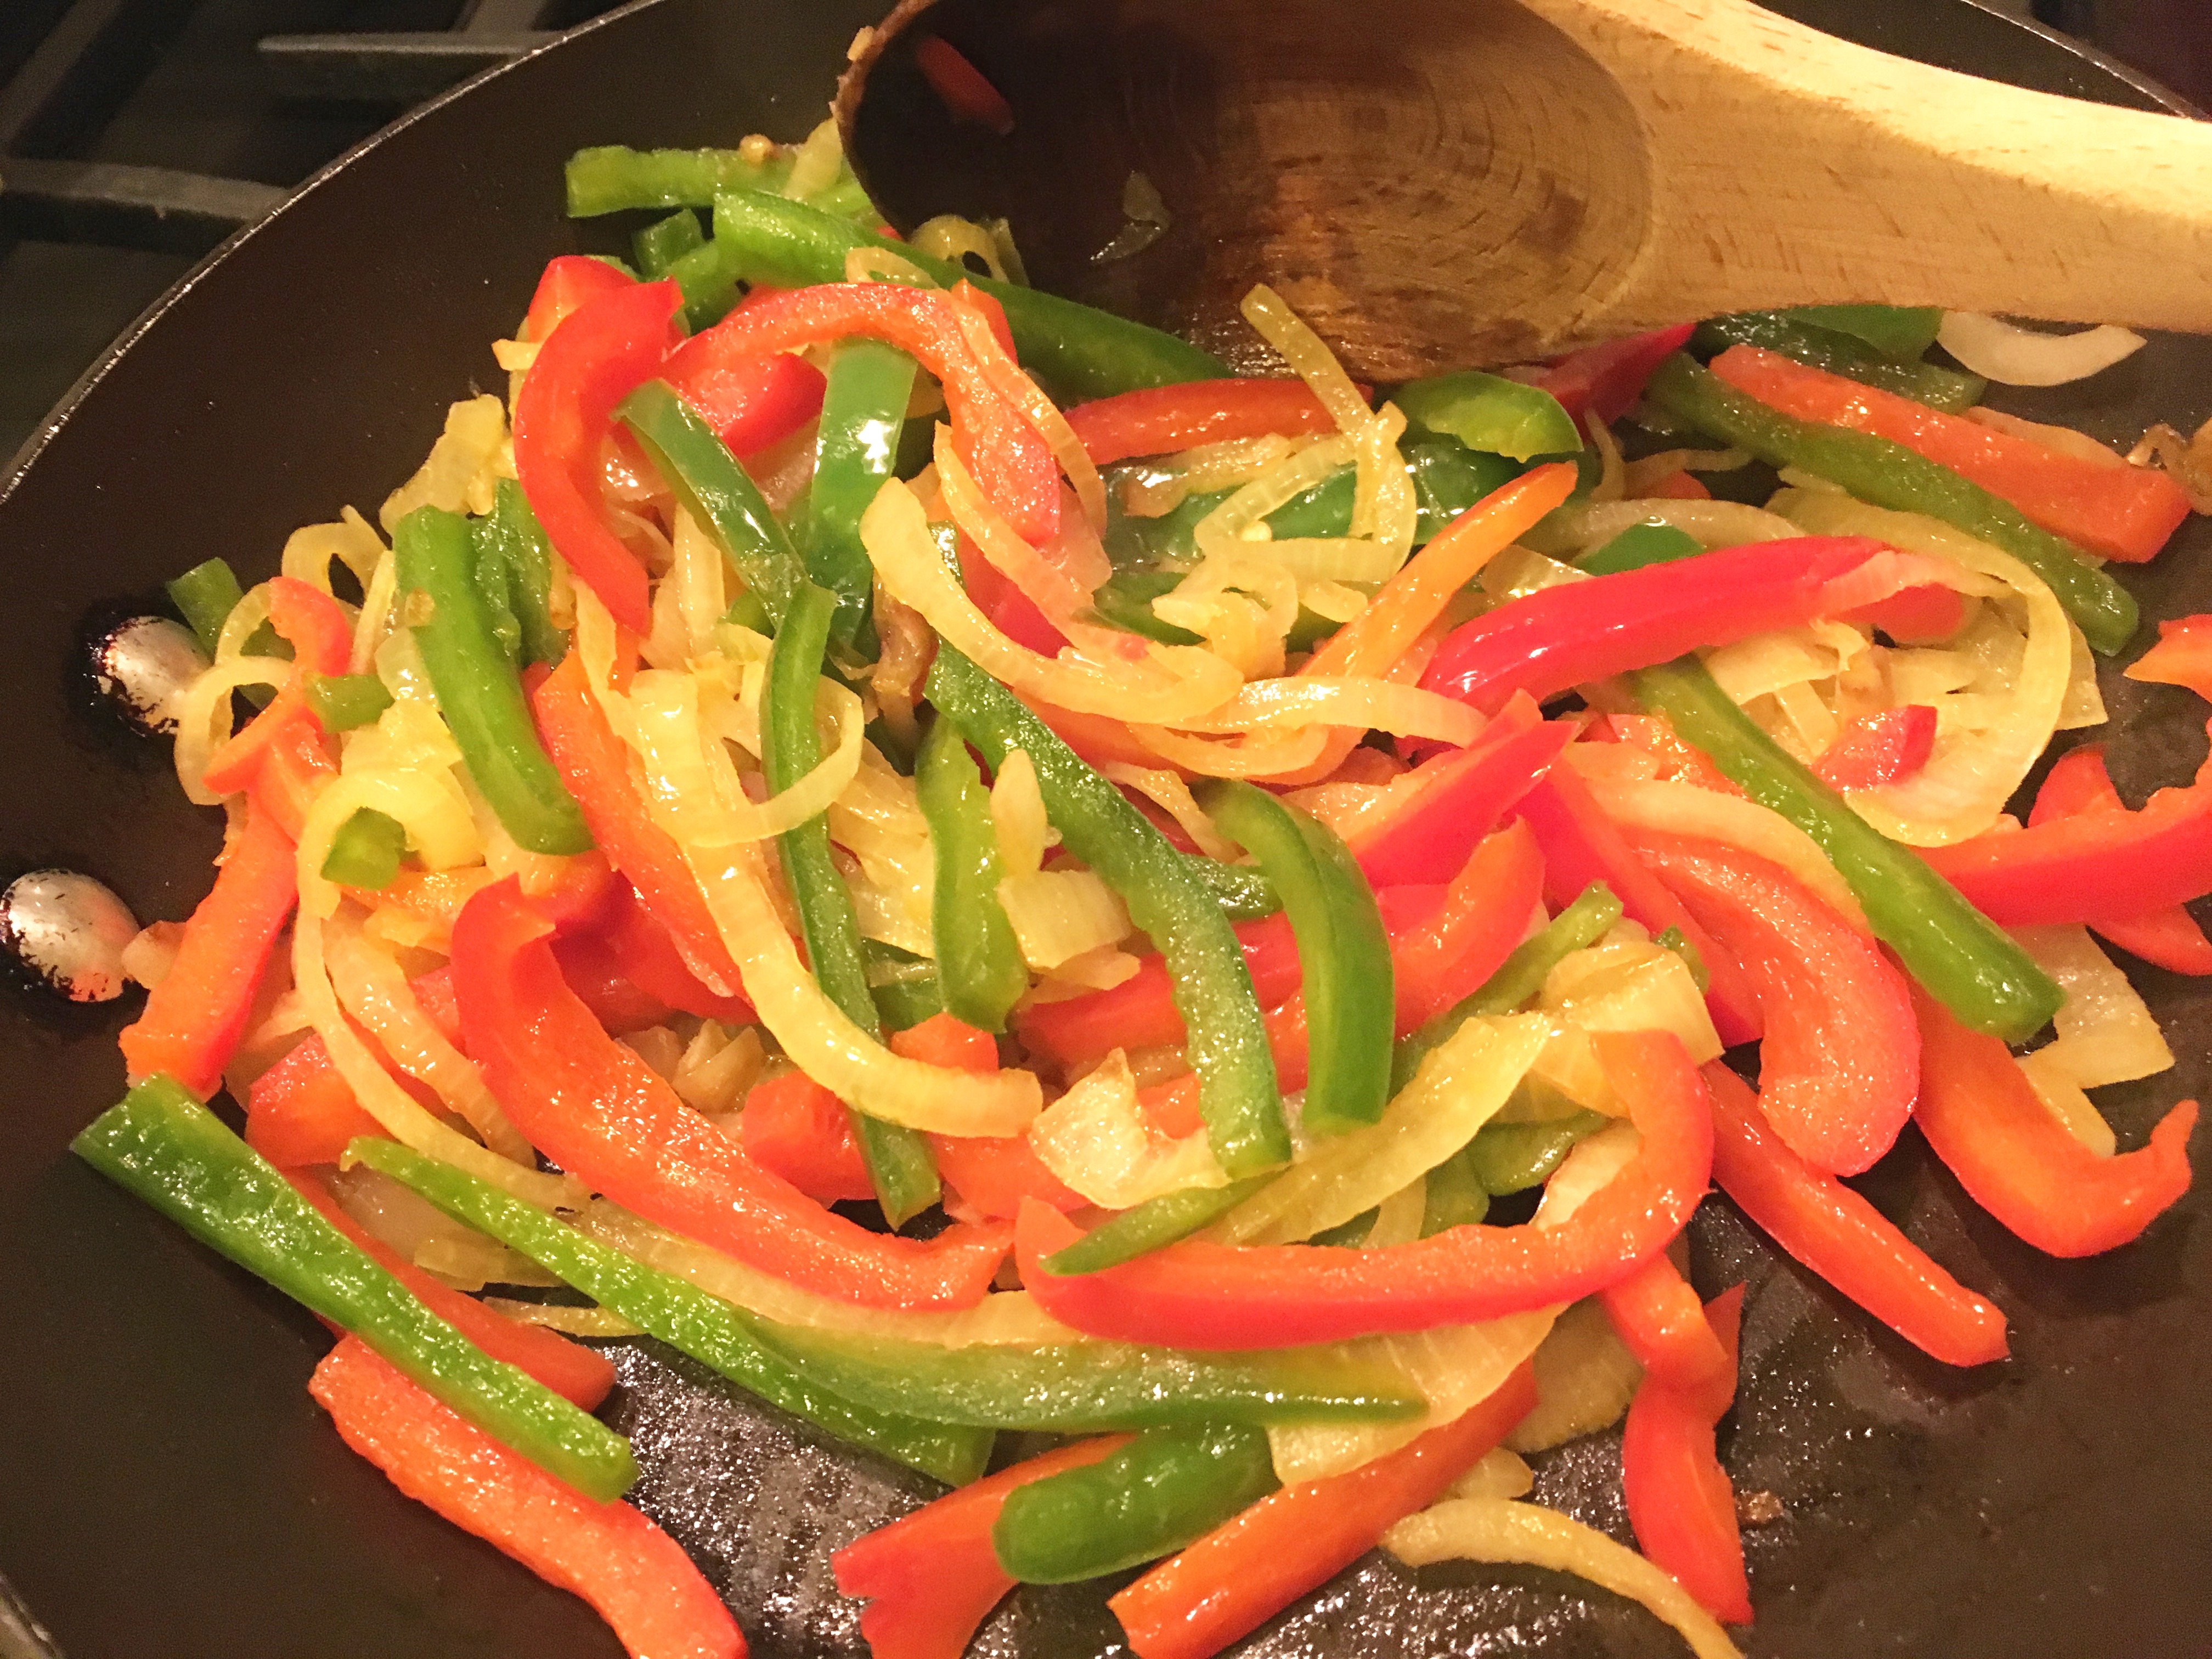 Sauteing my peppers and onions...